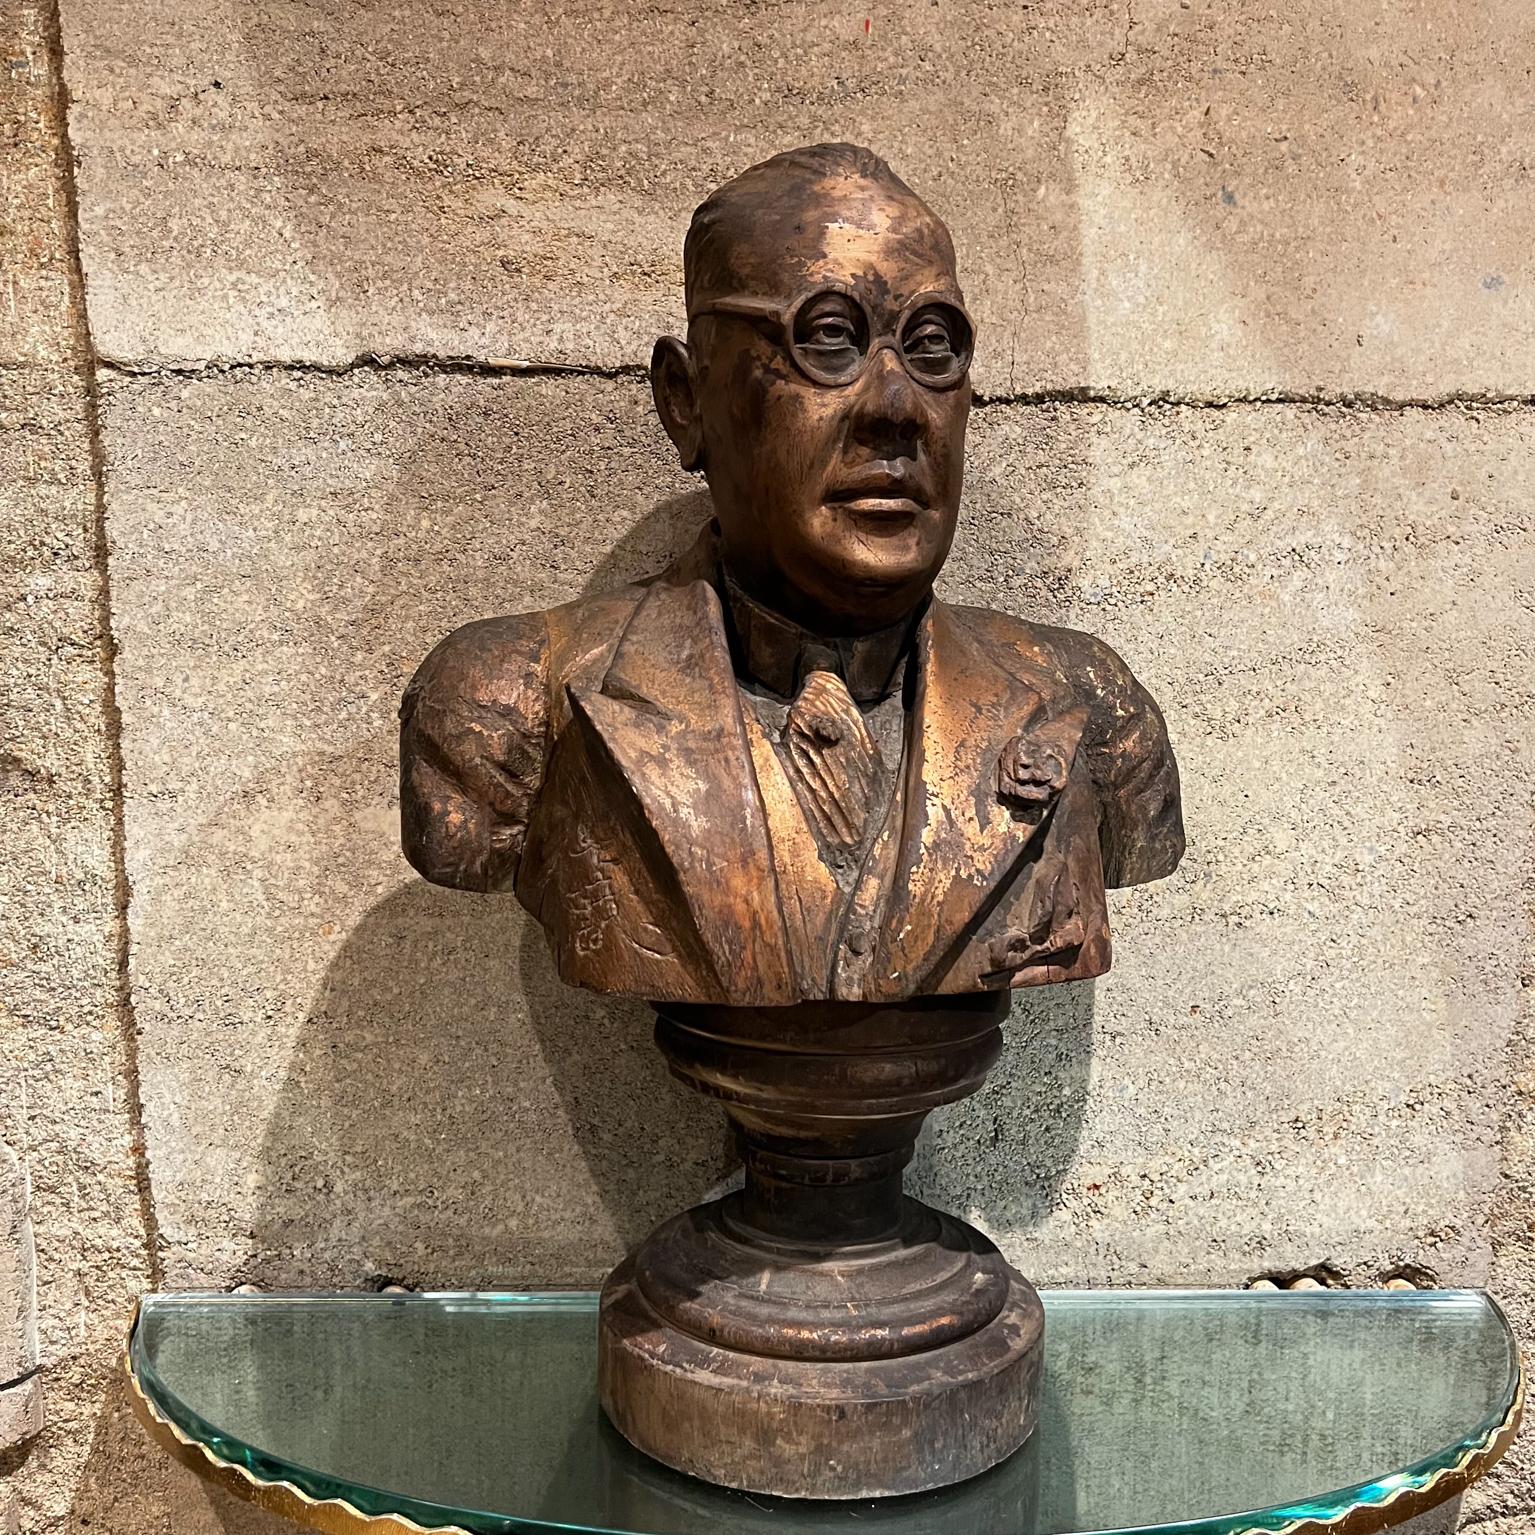 1943 Distinguished Hand Carved Wood Bust Elegant Bespectacled Gentleman Rich Gold Patina.
Solid wood with original vintage unrestored finish. 
Wood appears to be finished with gold paint providing an elegant patina.
Signed by the artist, dated